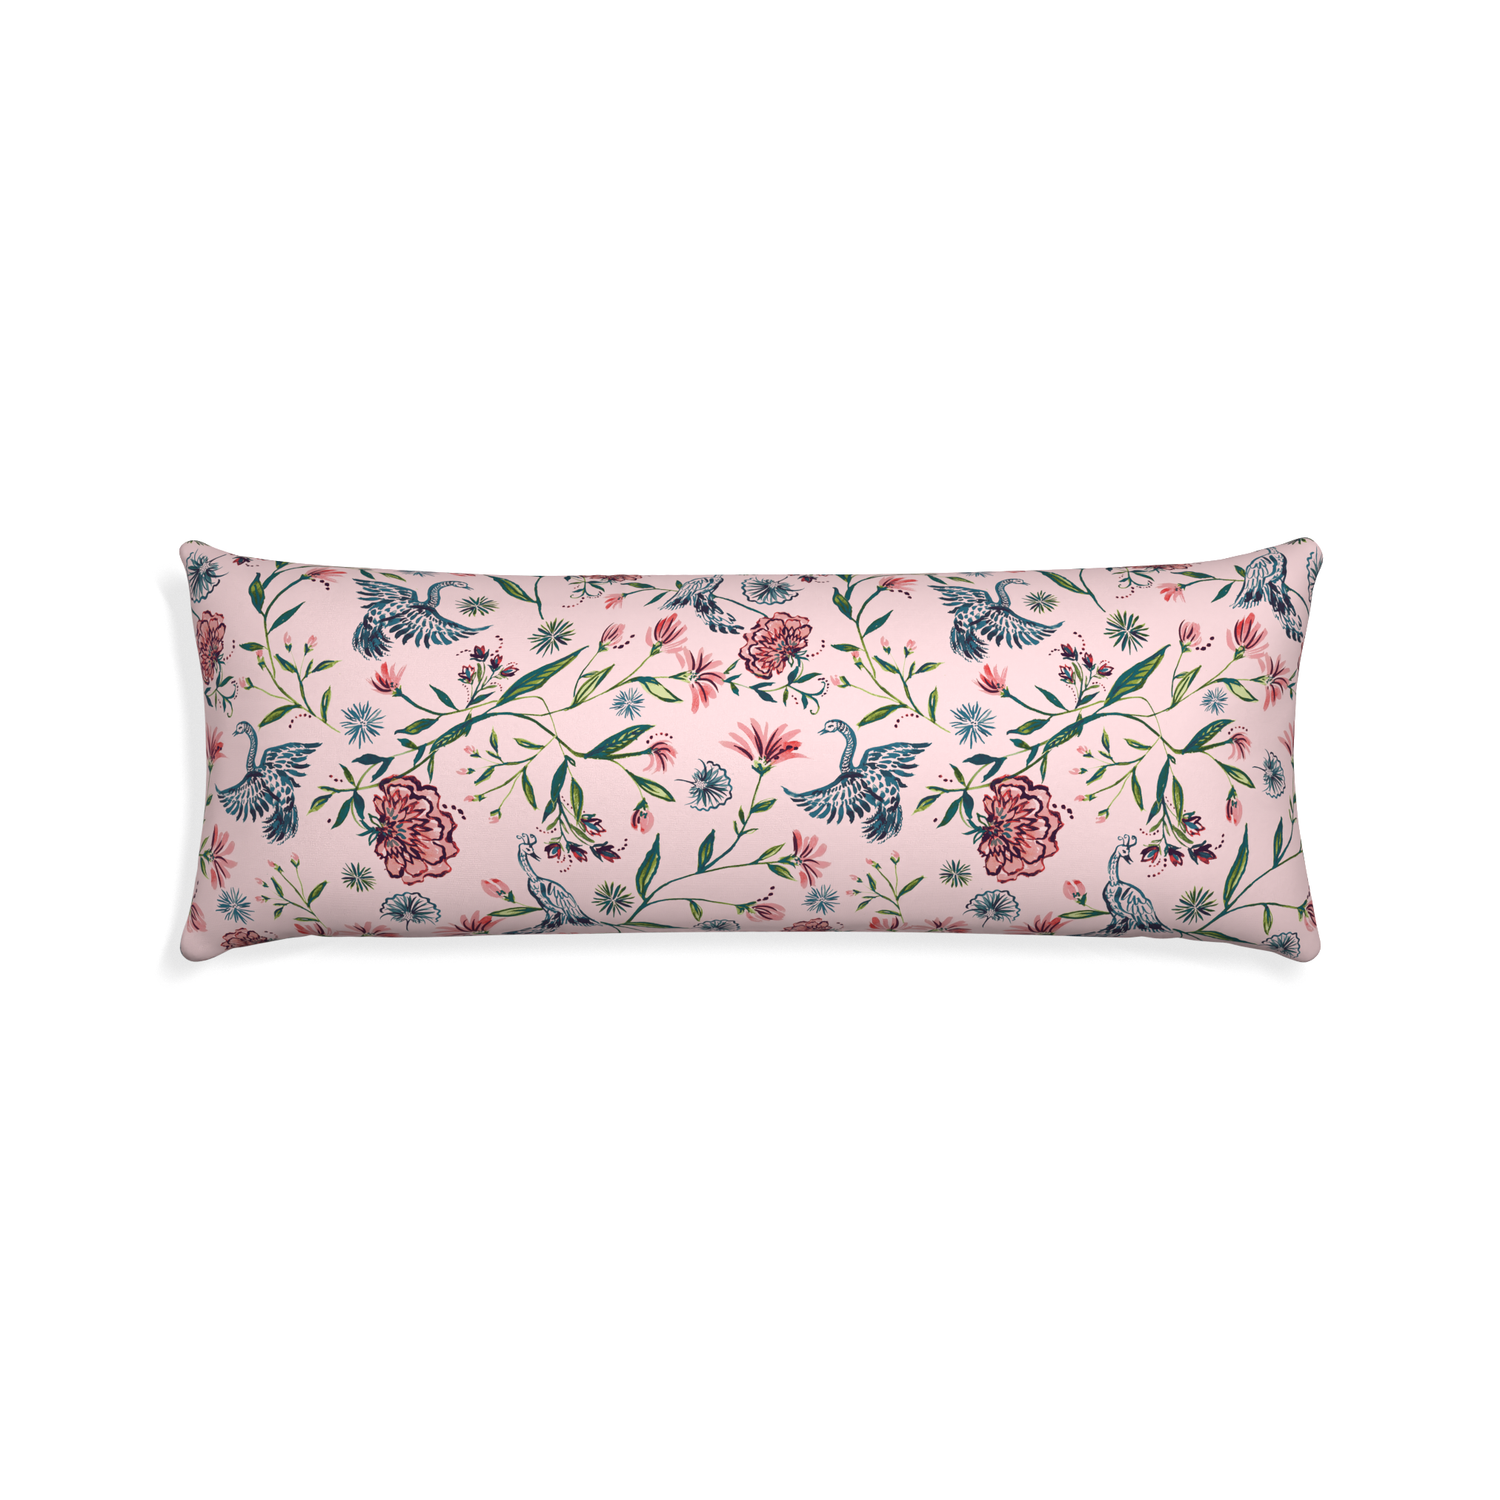 Xl-lumbar daphne rose custom pillow with none on white background